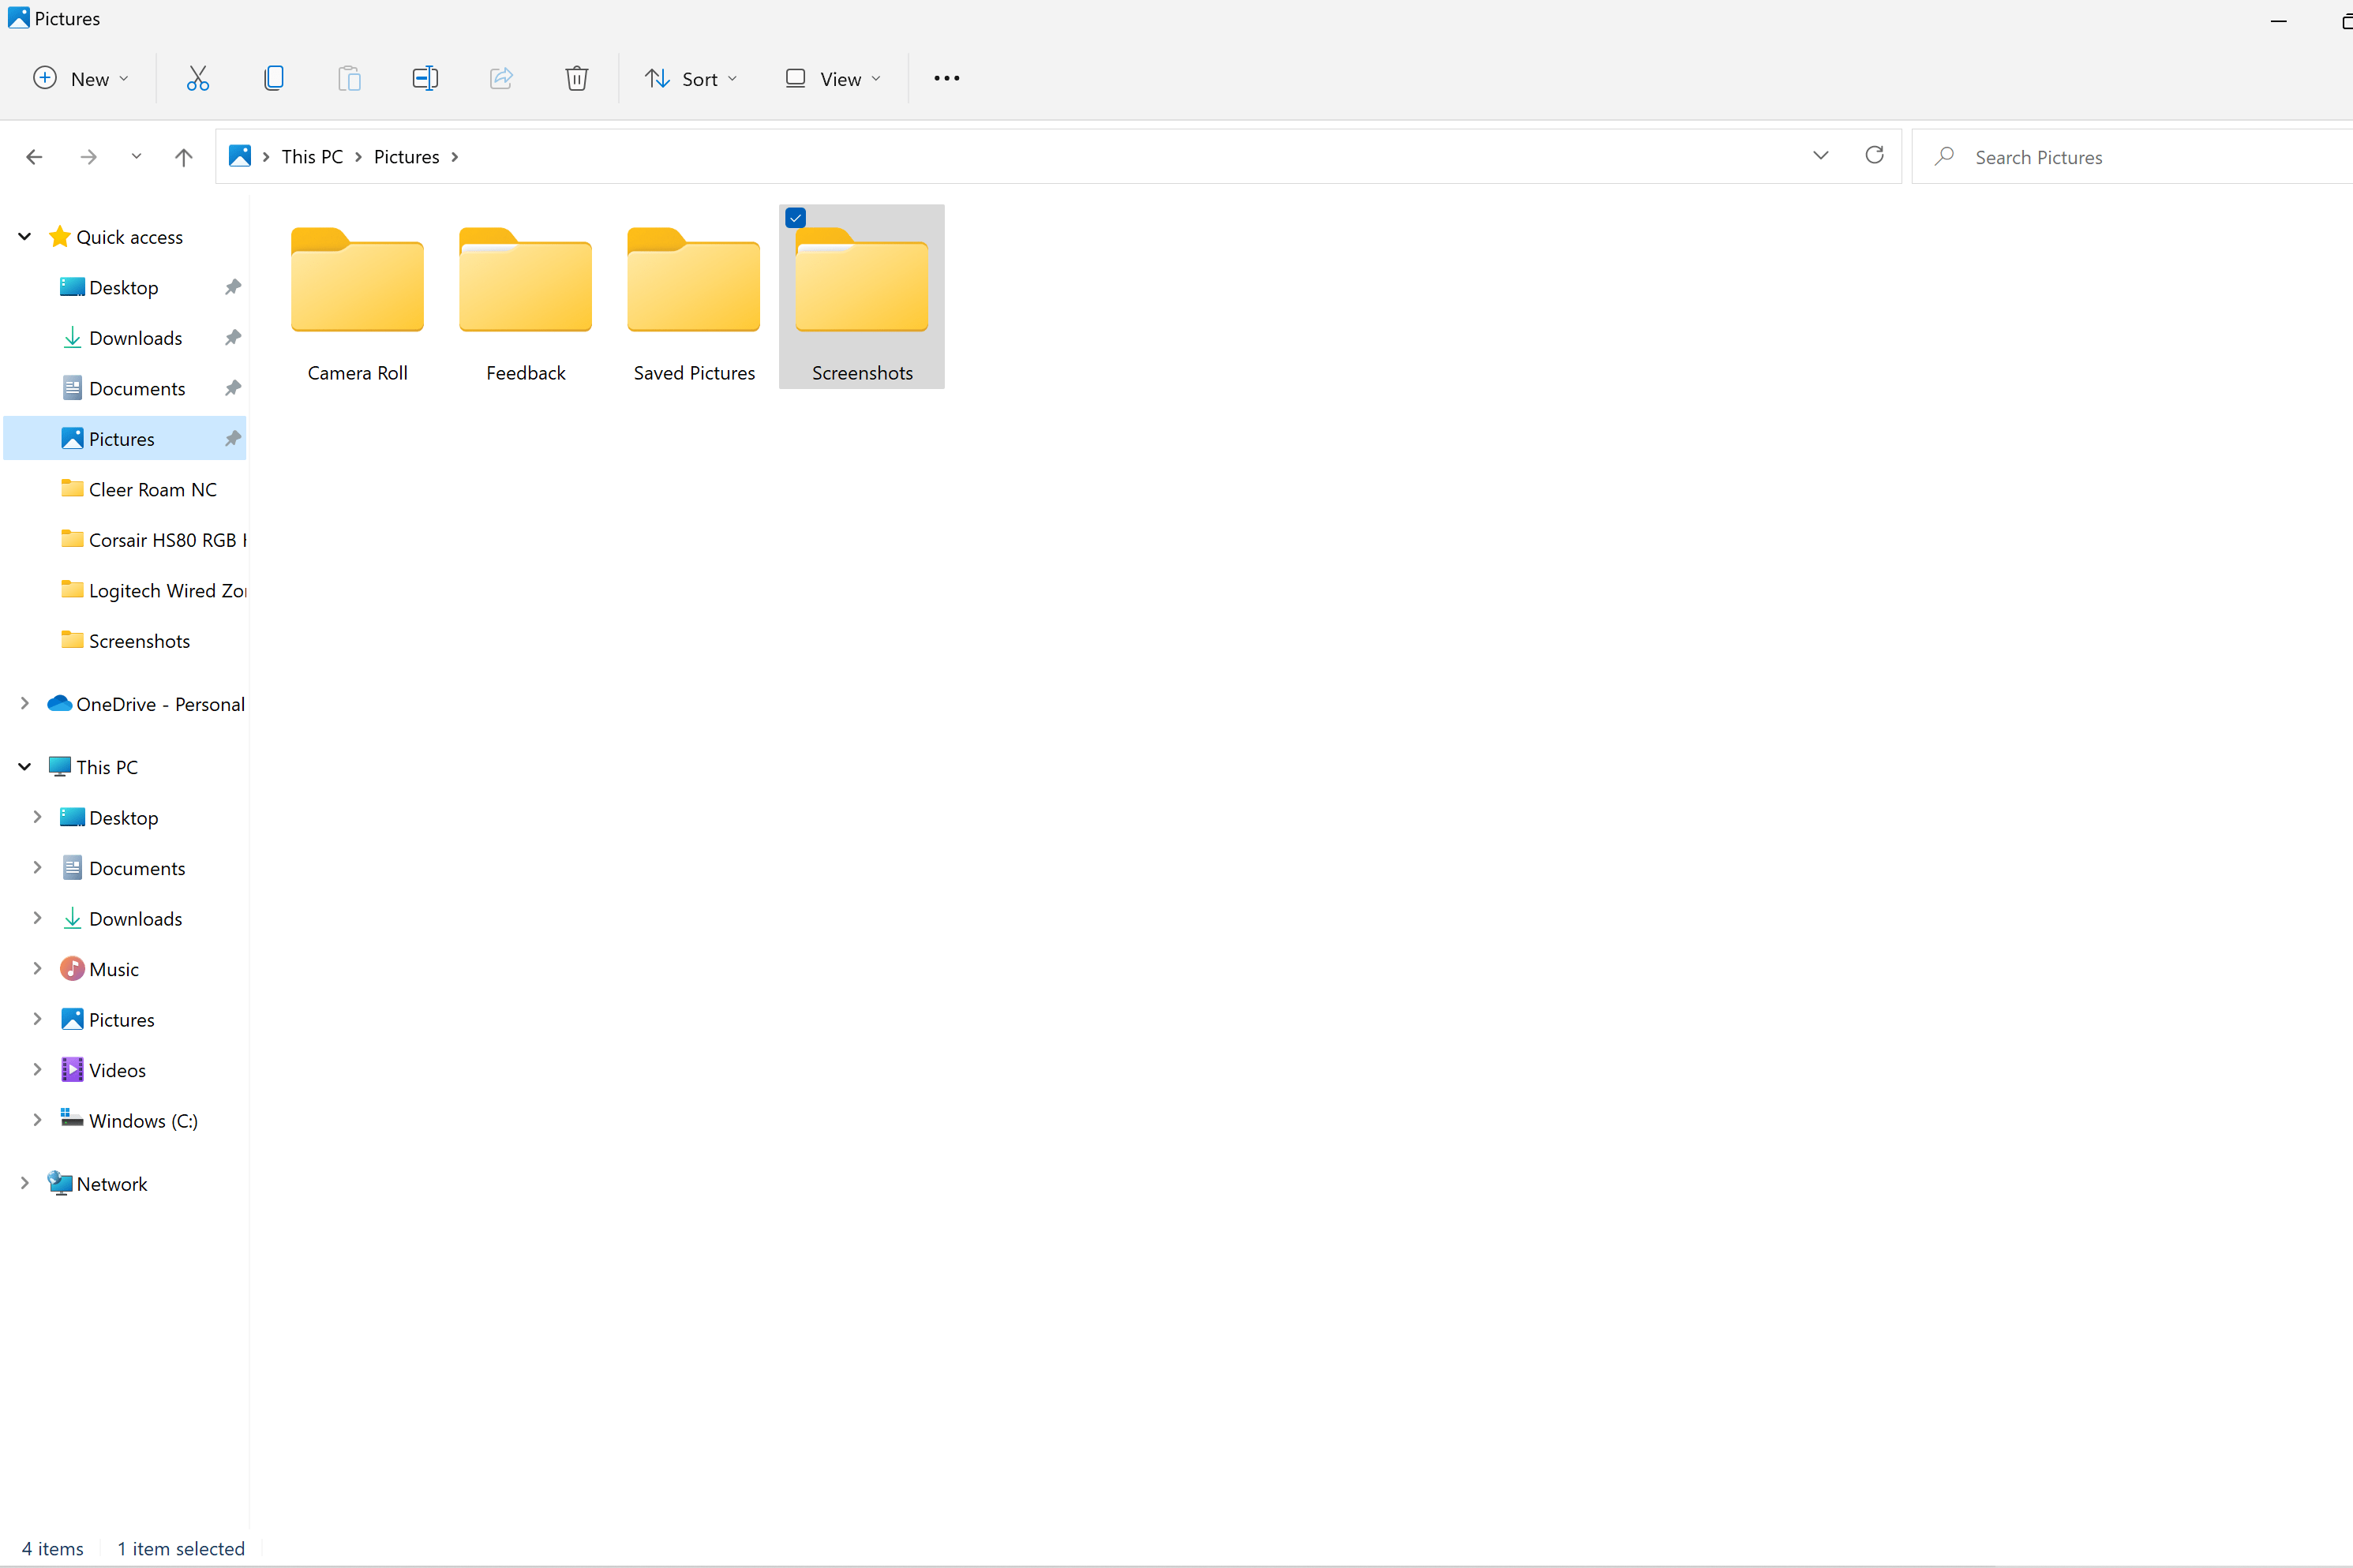 Go into your Picture Folder and then go into the Screenshots folder to access pictures 